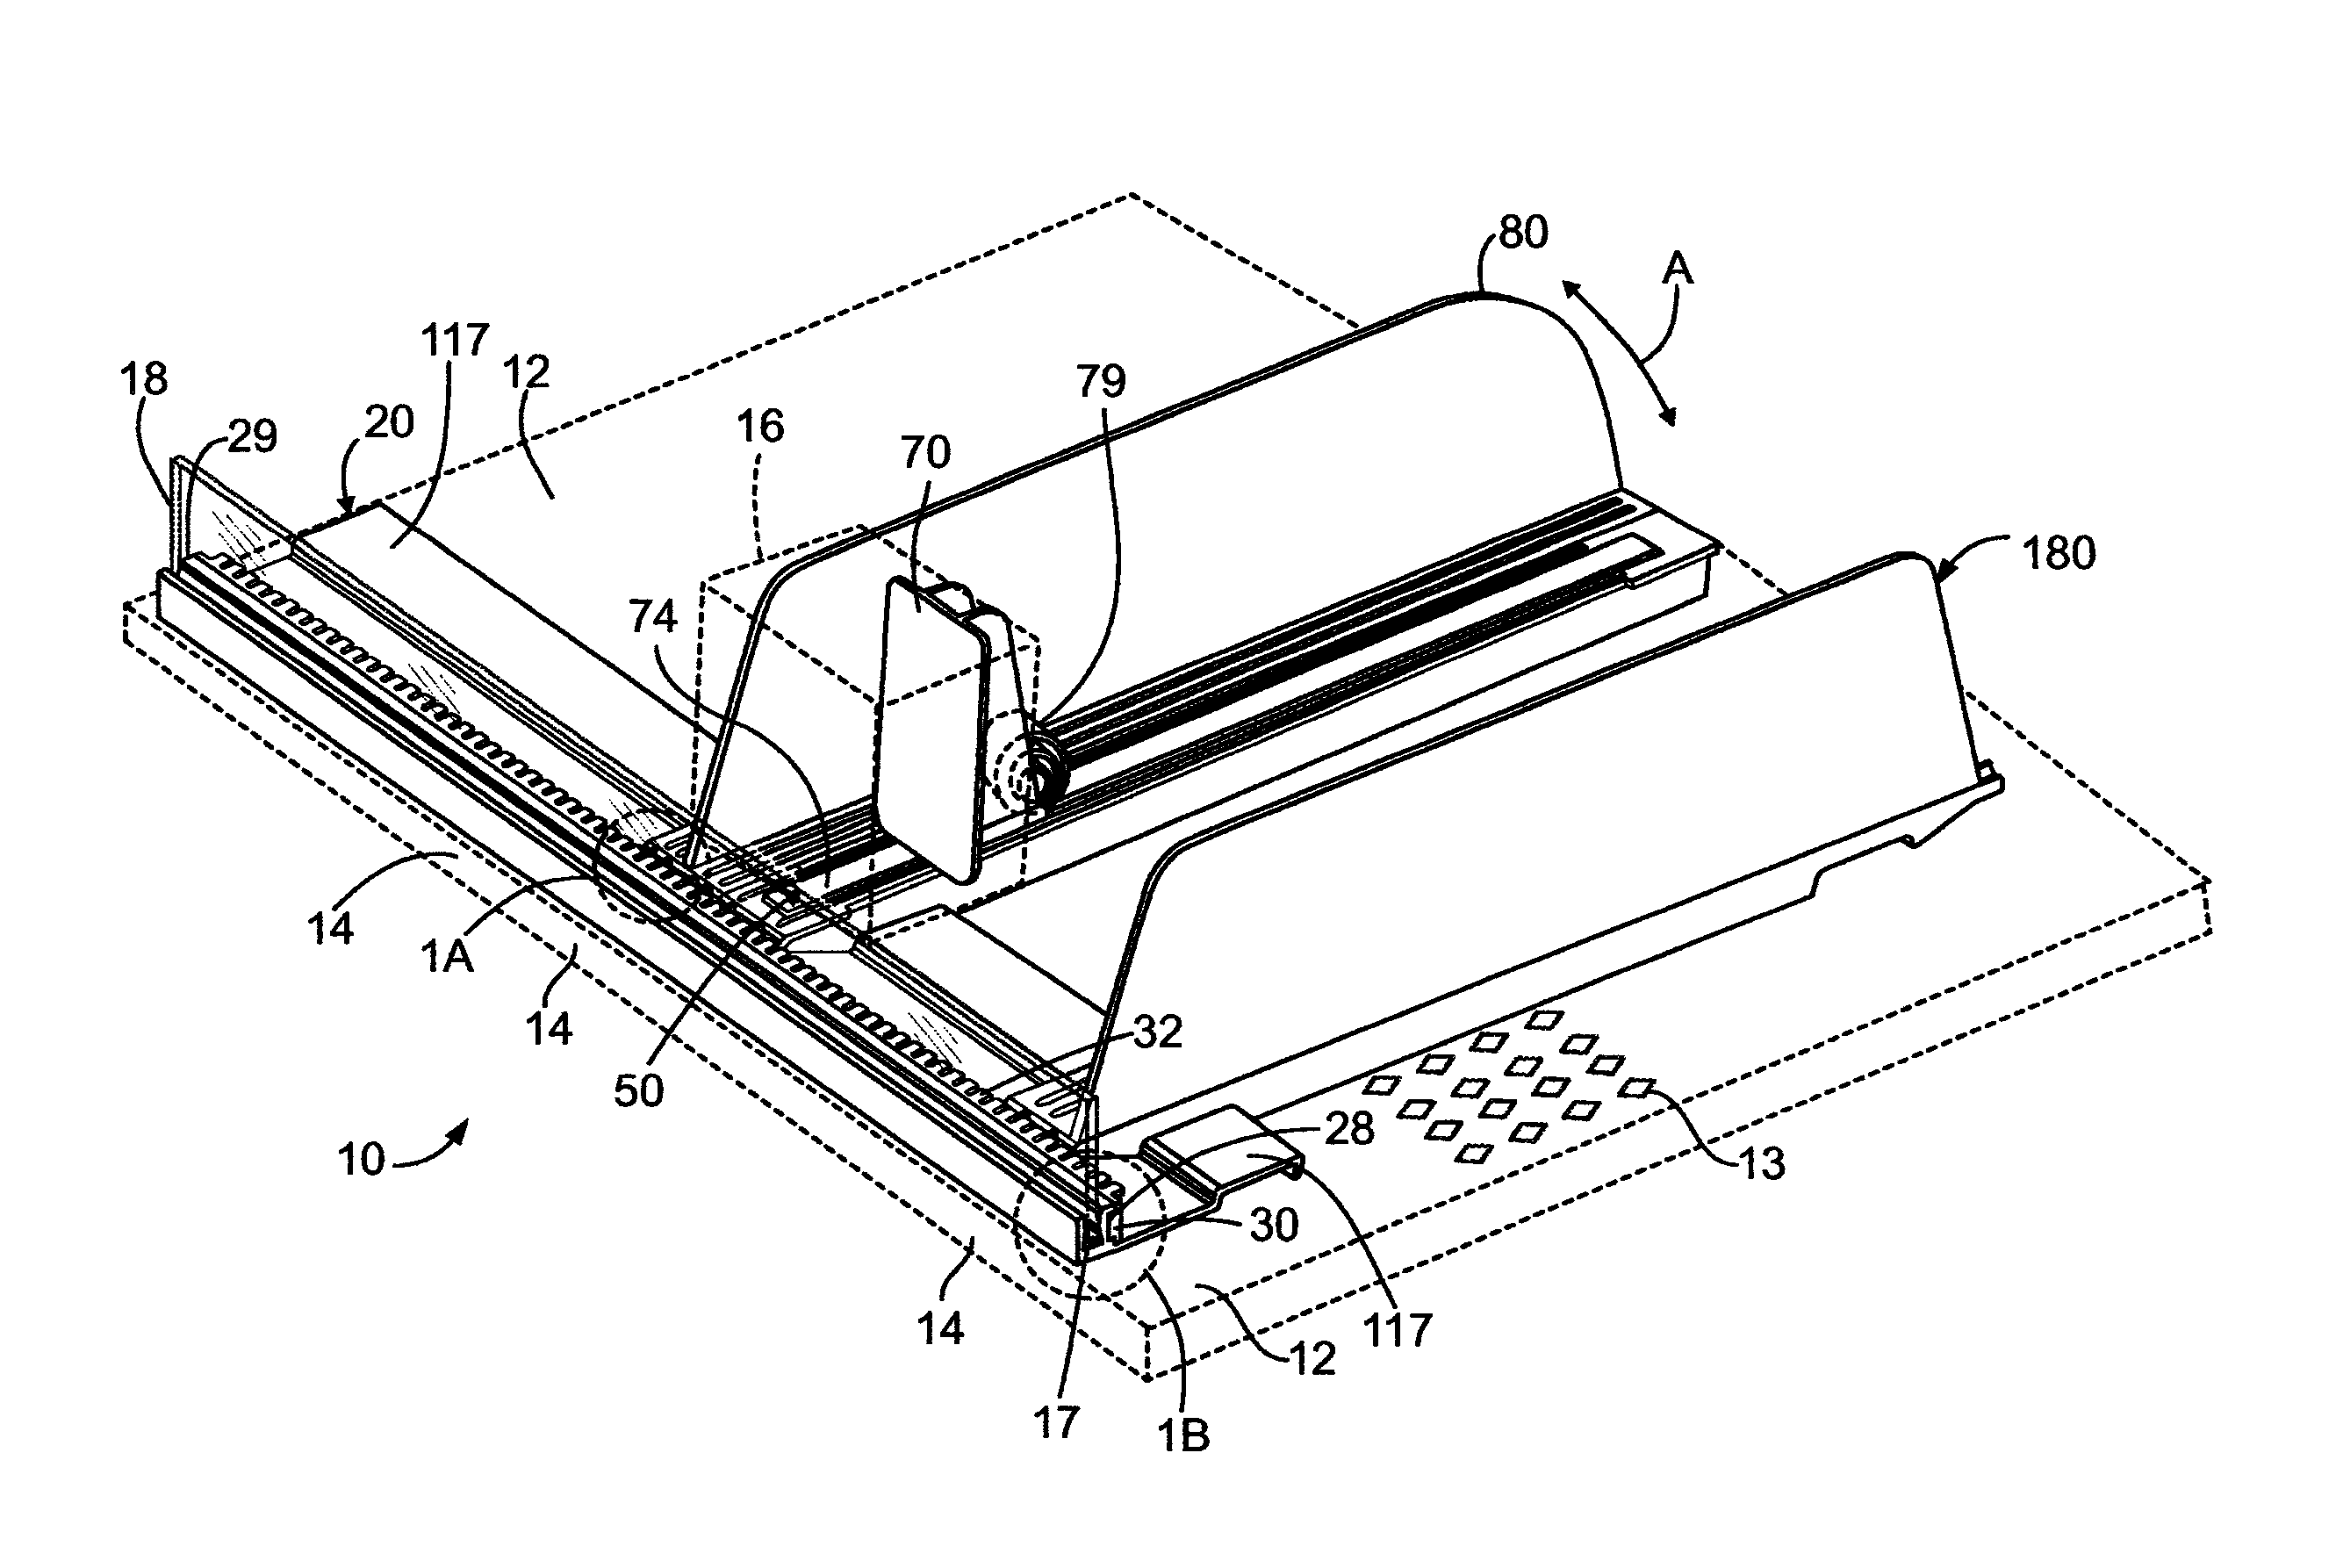 Merchandise display and pusher device